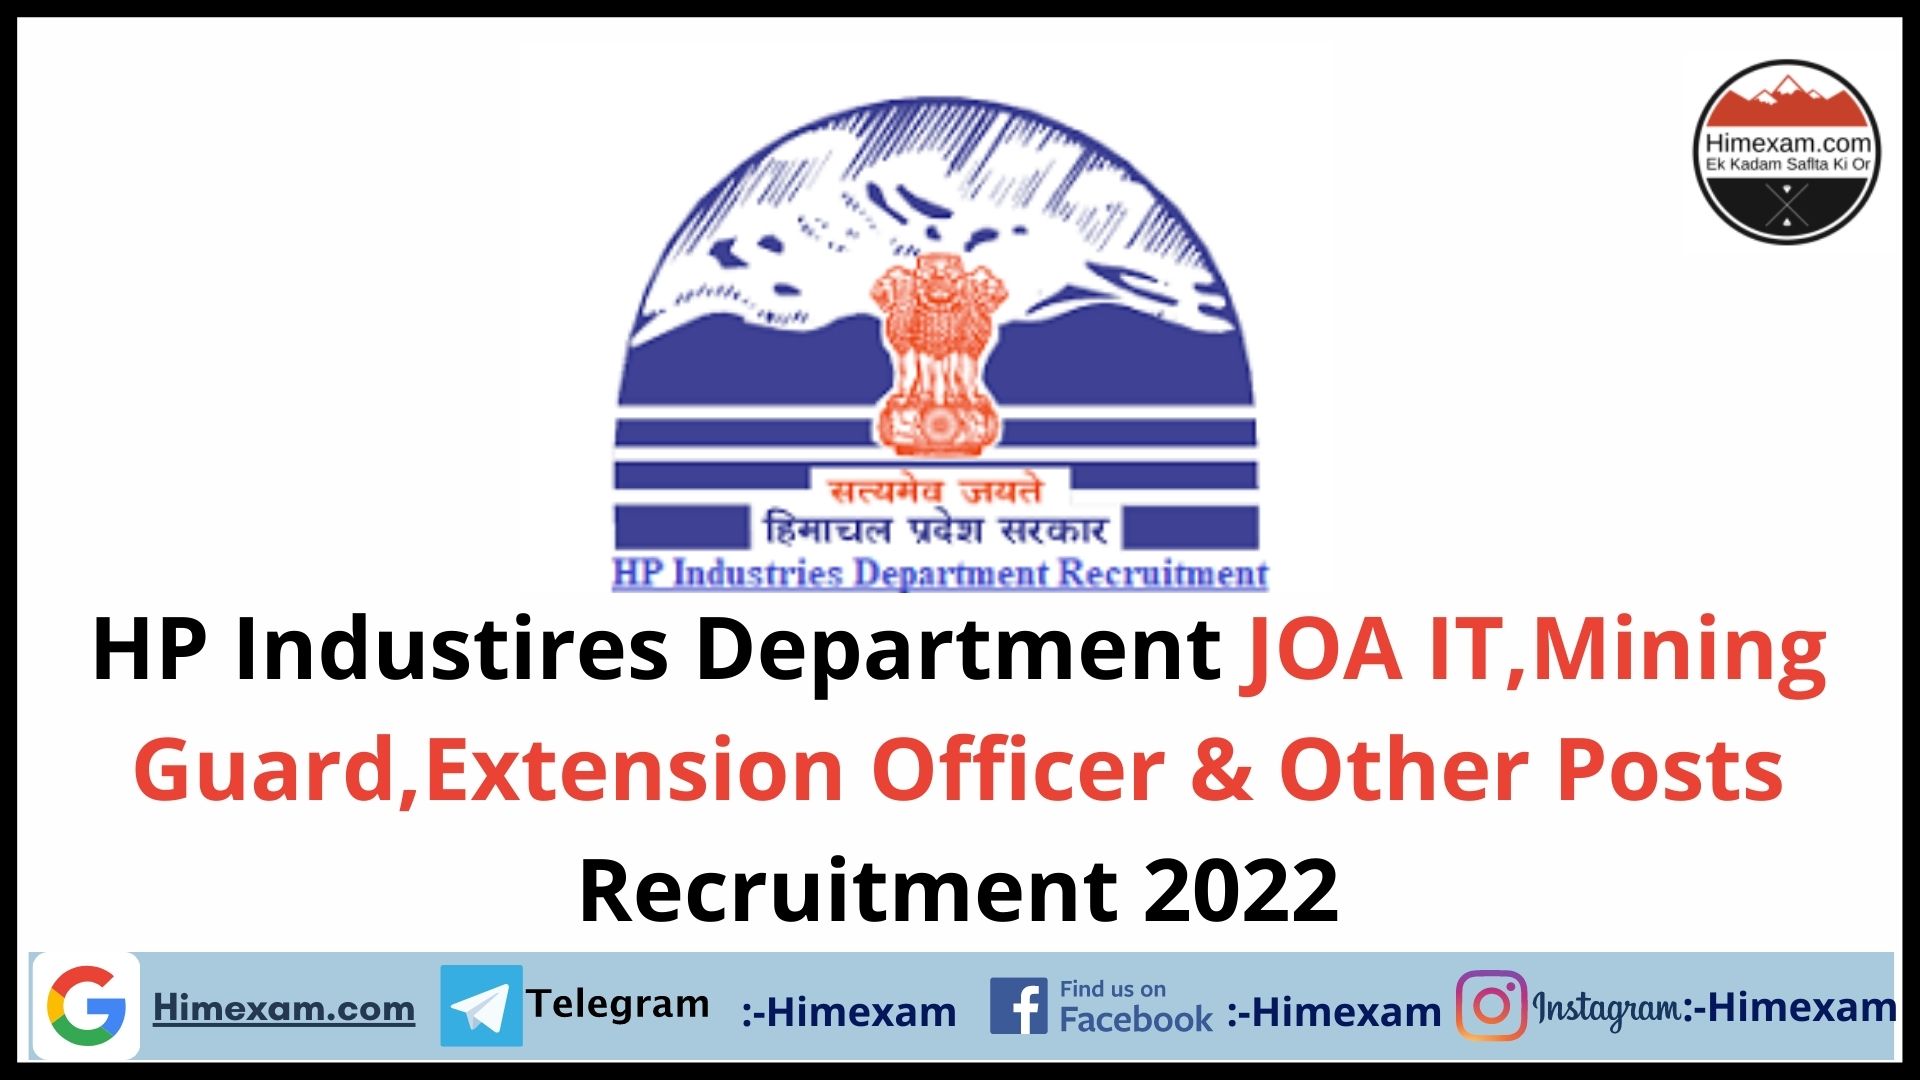 HP Industires Deptt. JOA IT,Mining Guard,Extension Officer & Other Posts Recruitment 2022